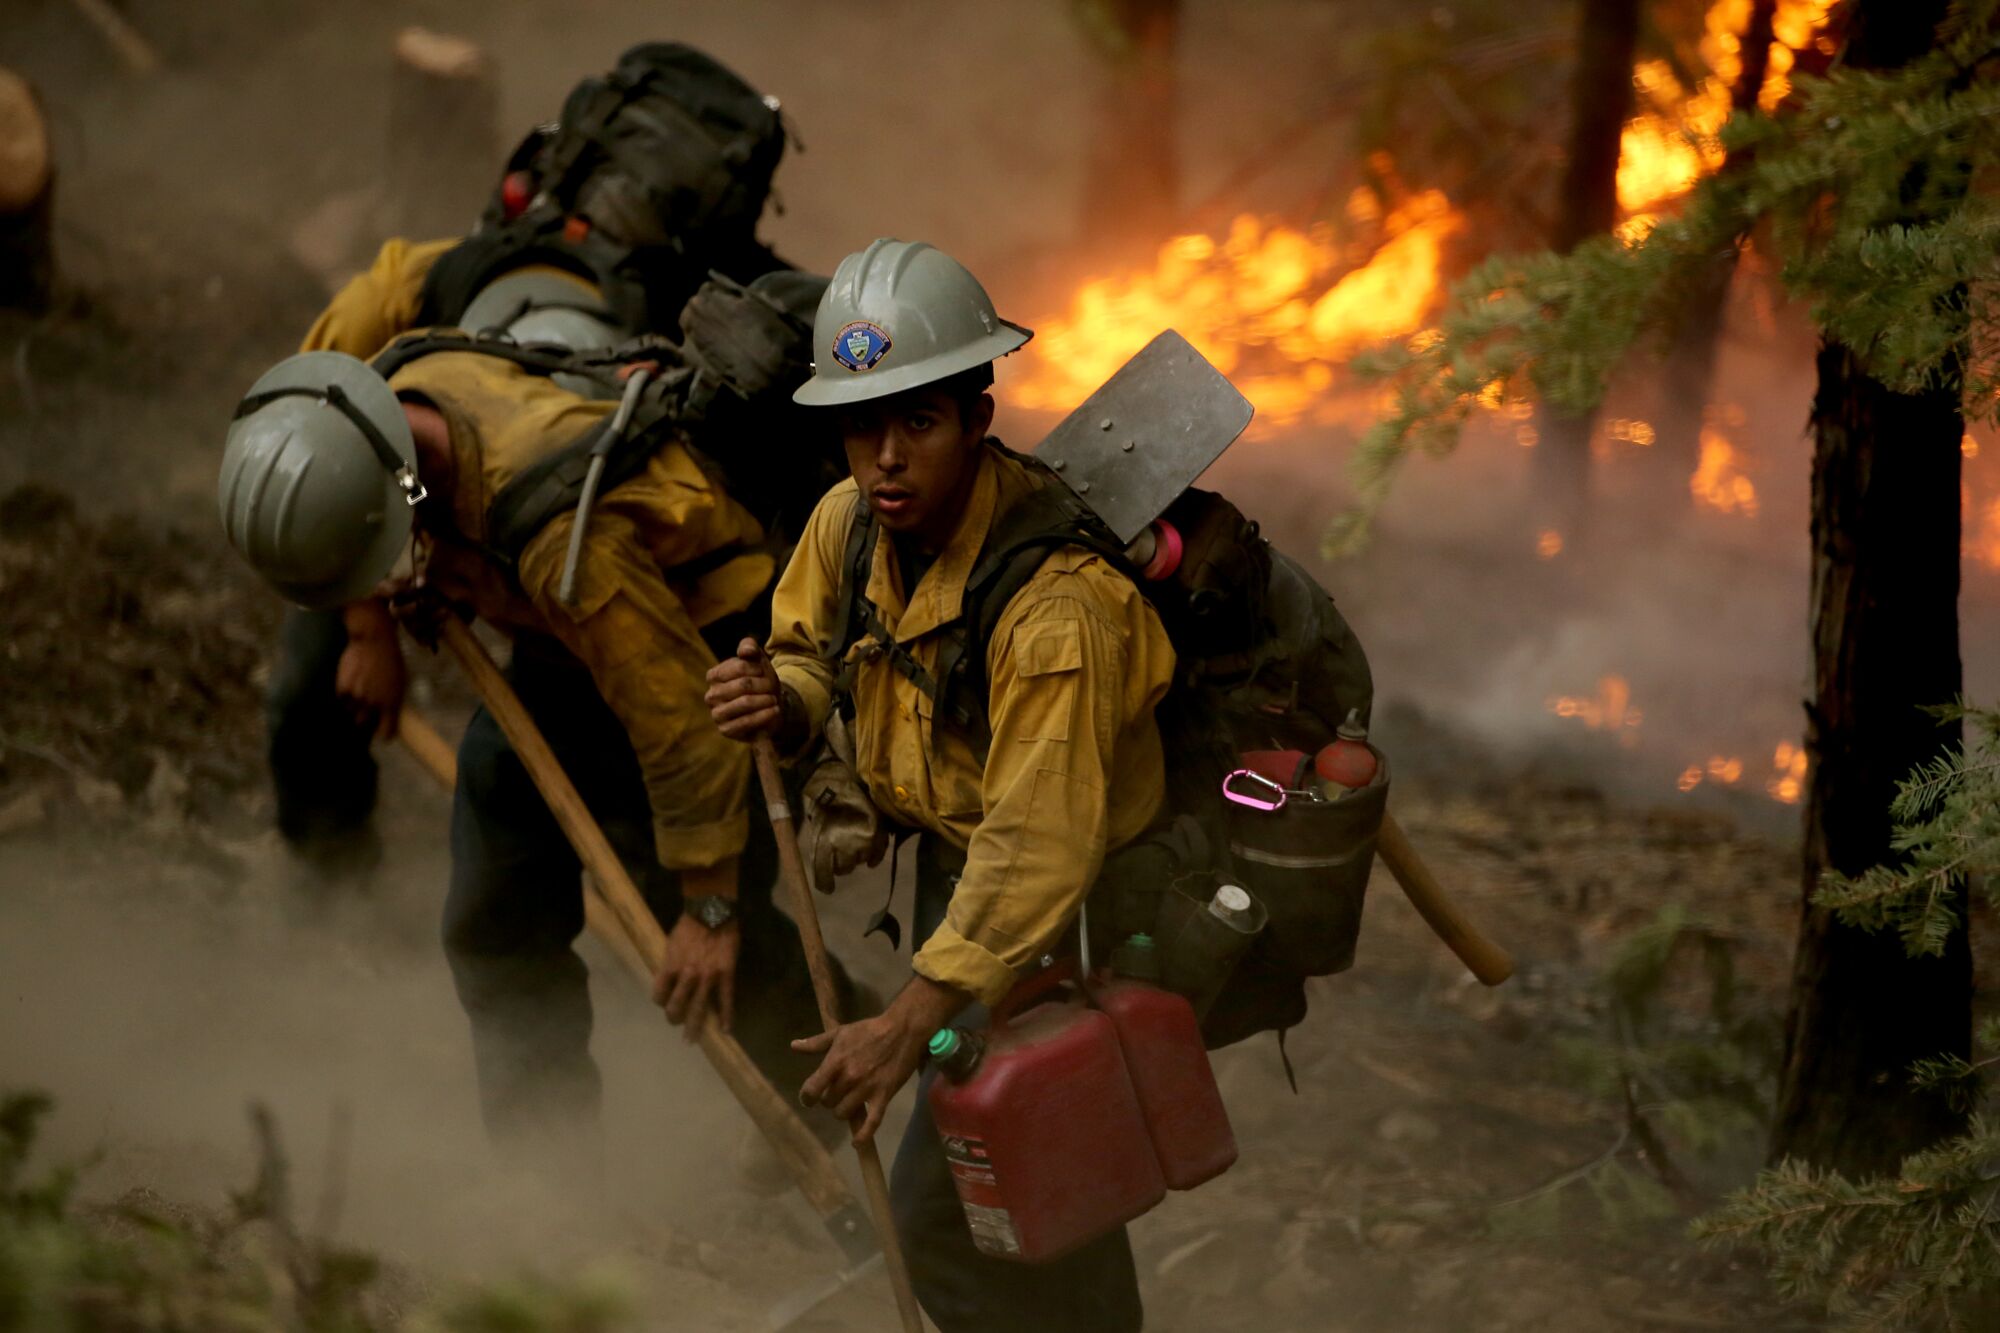 Firefighters use hand tools to dig lines in the forest ground as flames burn behind them